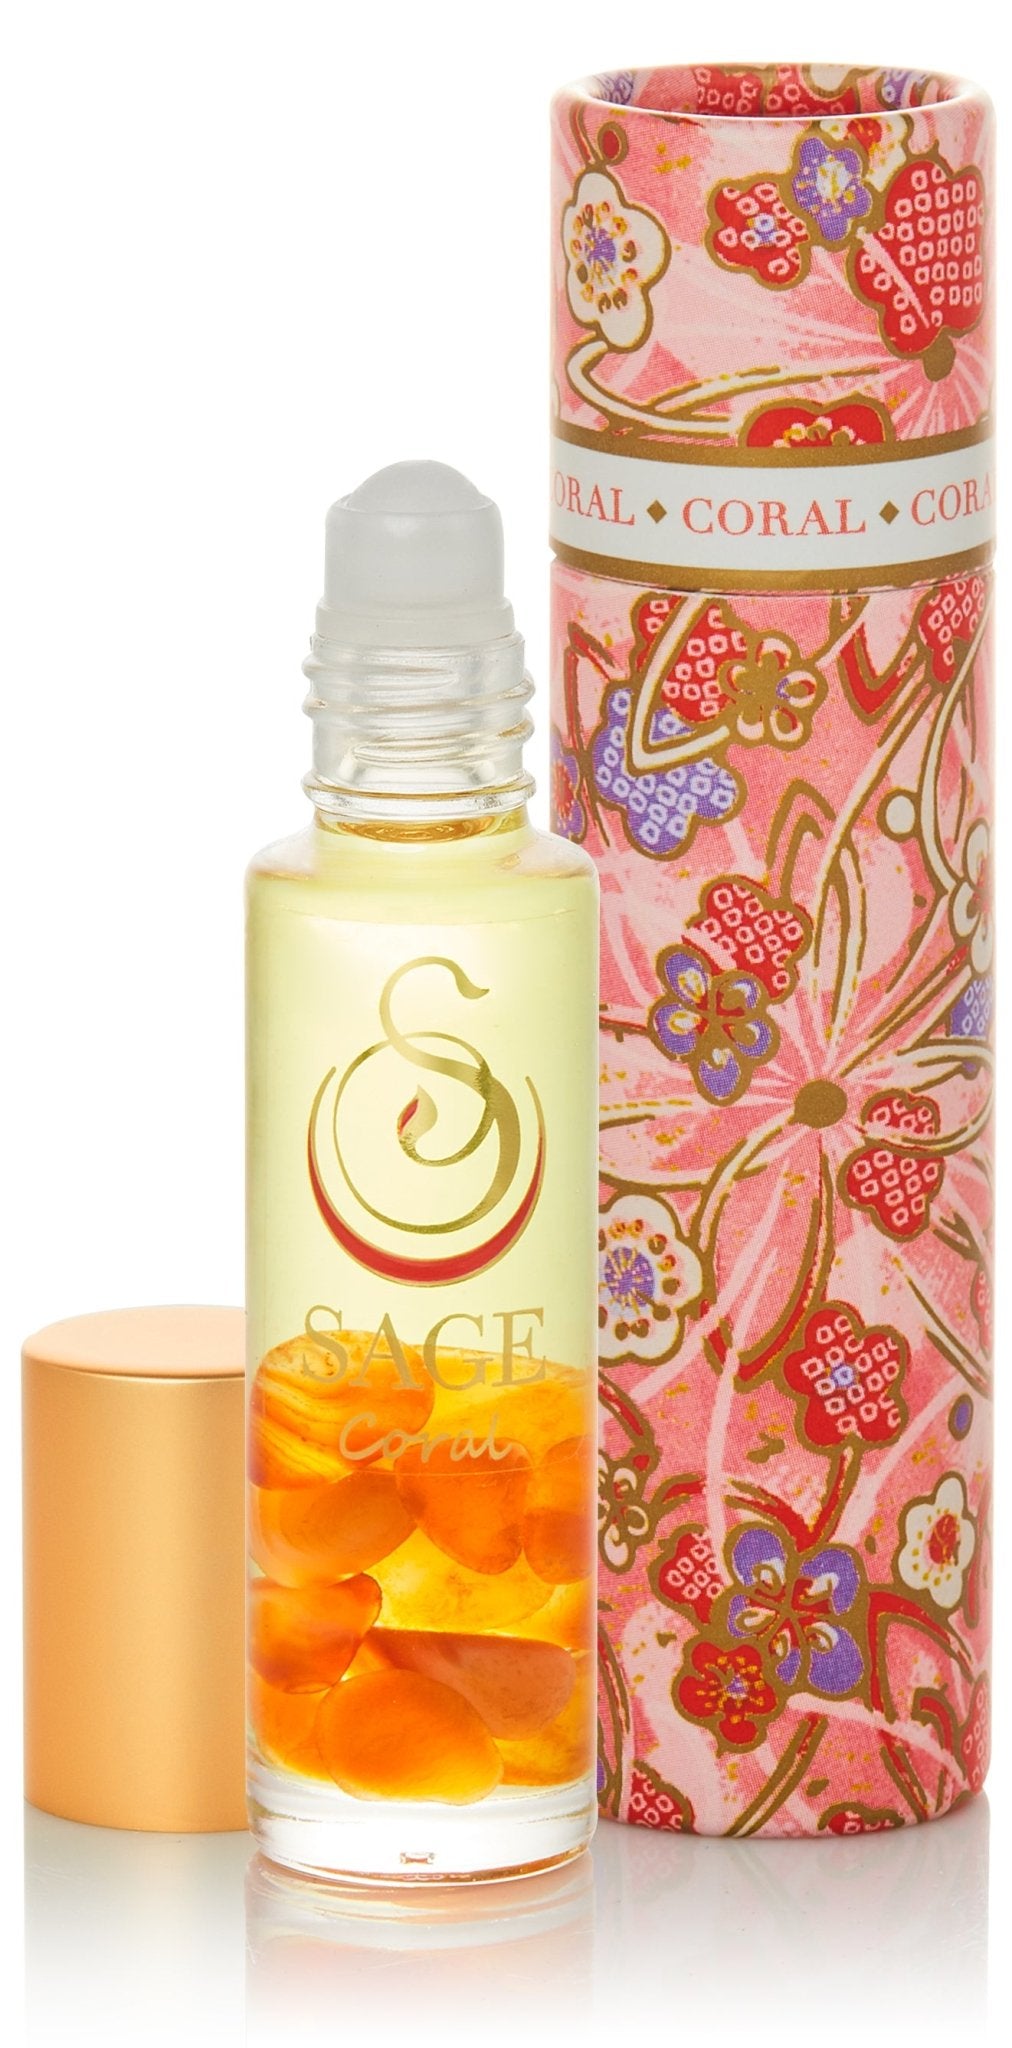 Coral 1/4 oz Gemstone Perfume Oil Roll-On by Sage - The Sage Lifestyle